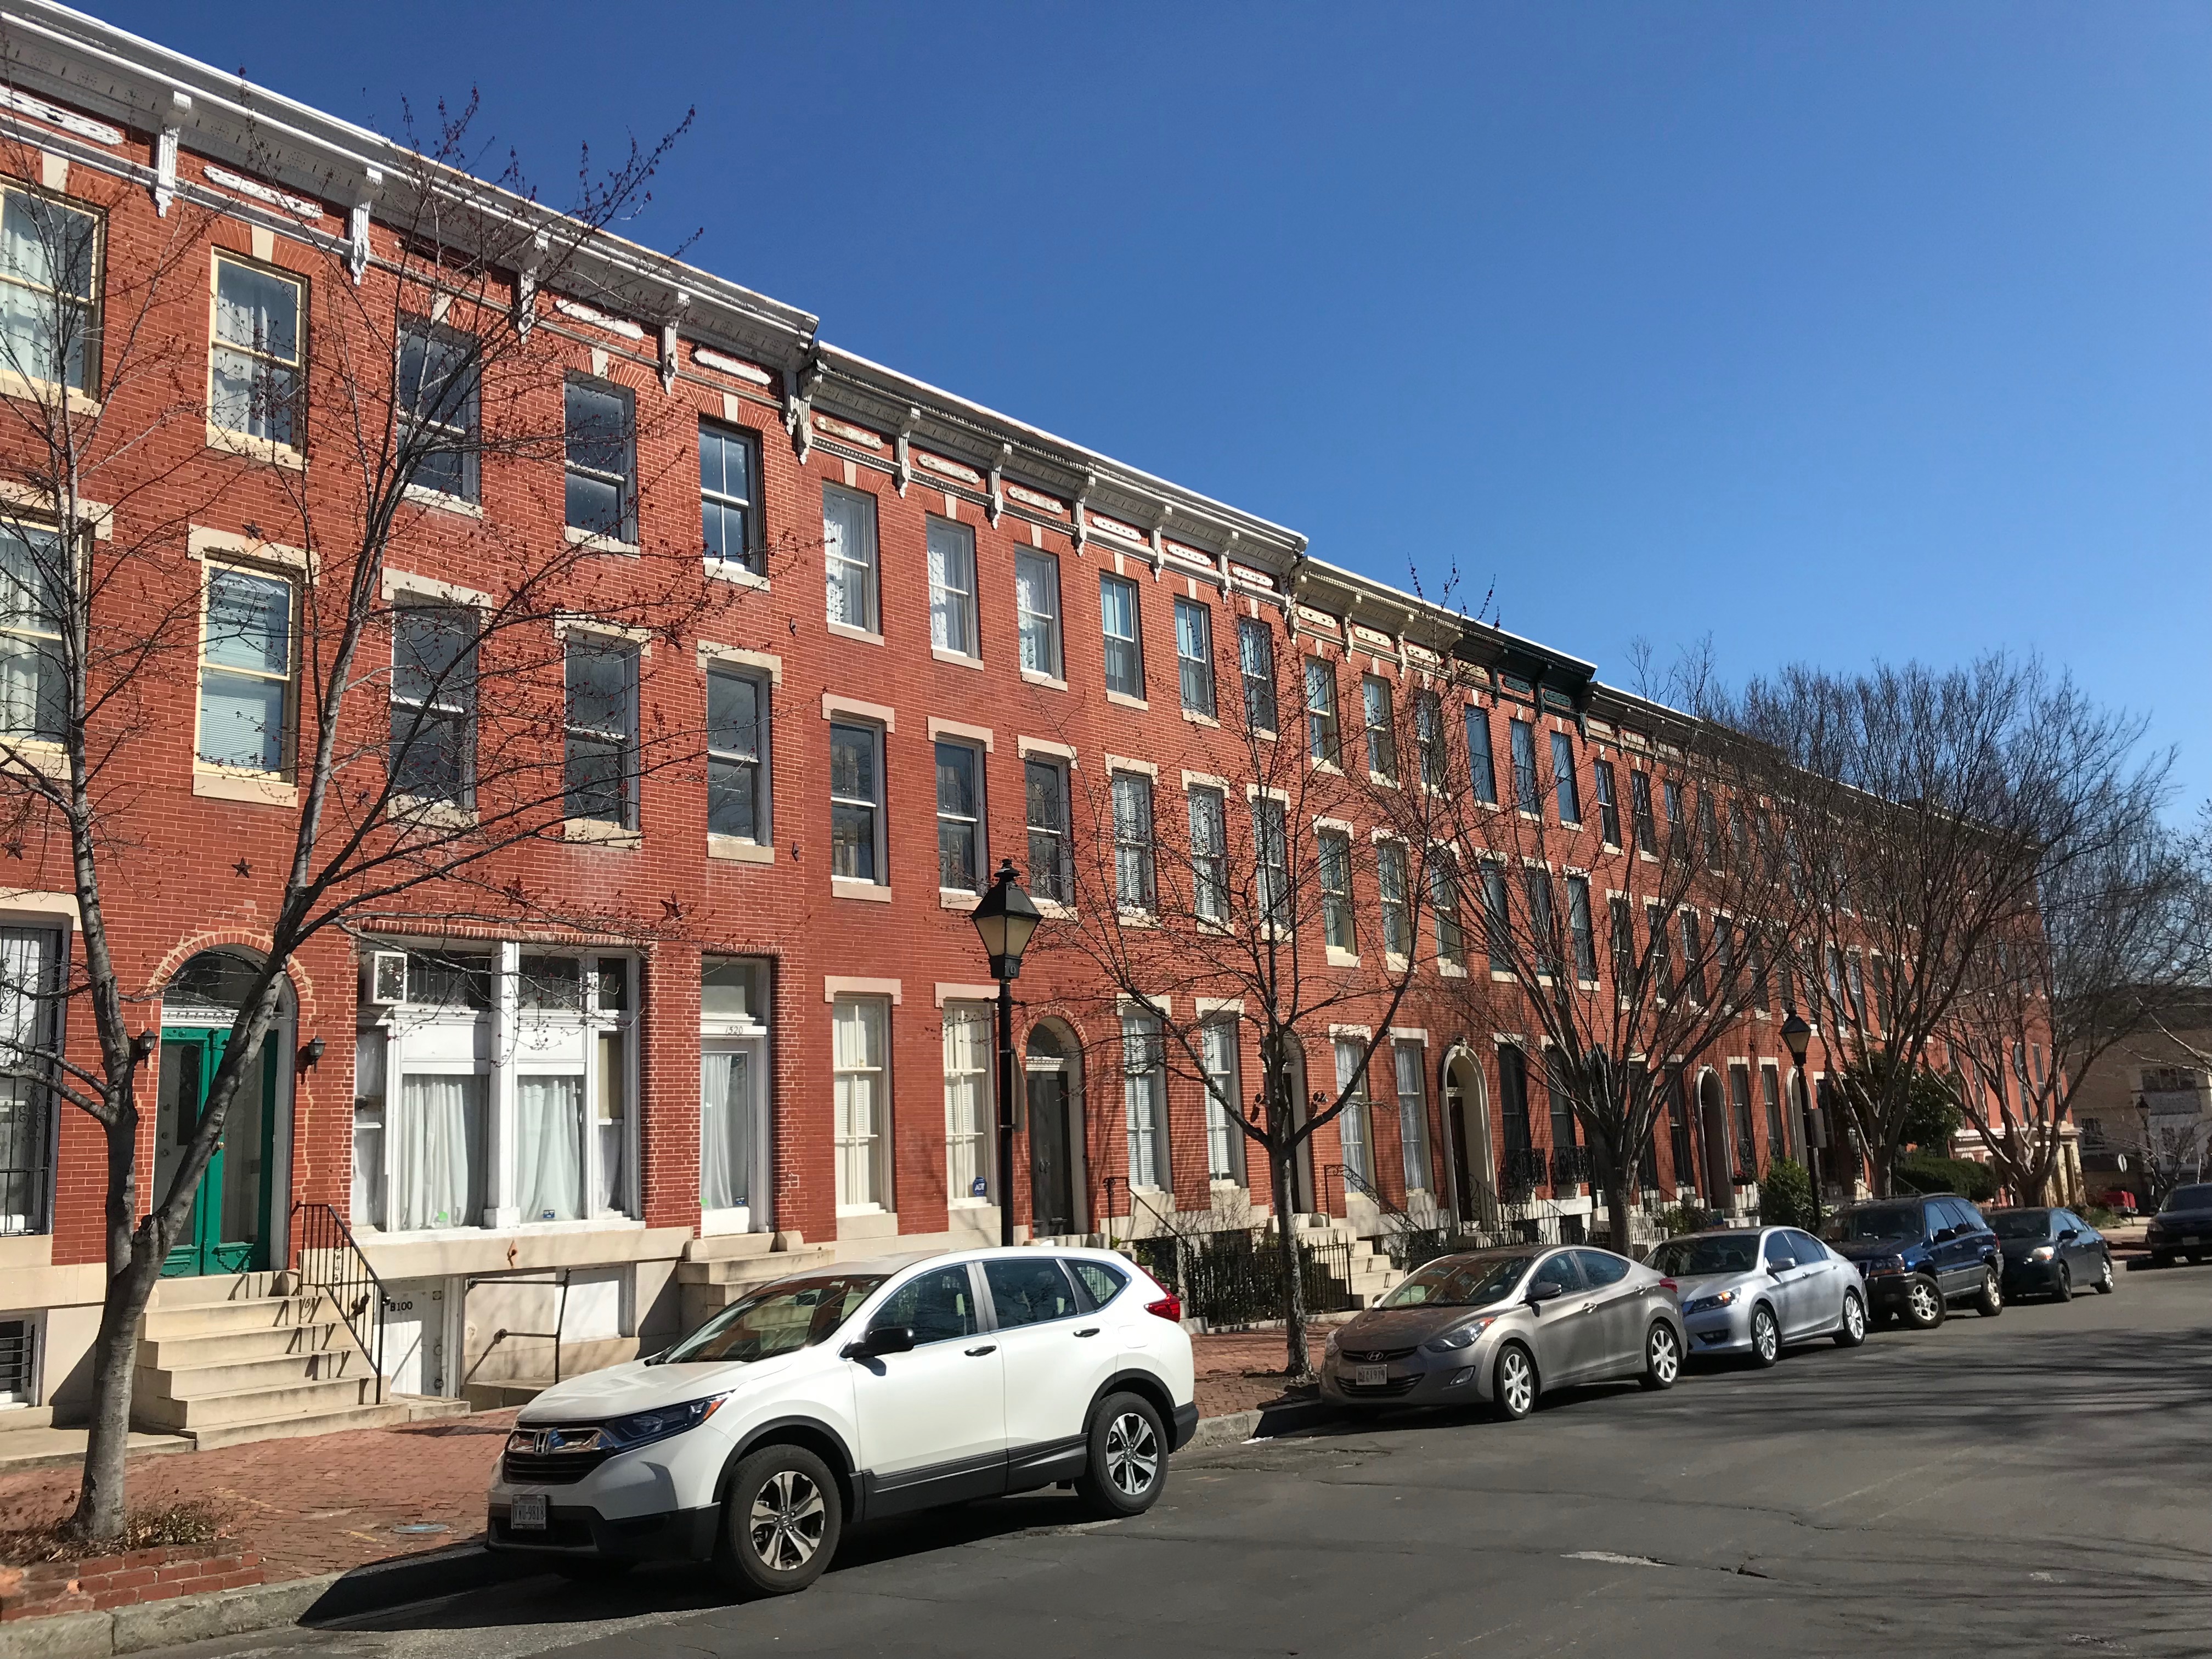 Rowhouses, 1500 block of hollins street, baltimore, md 21223 photo